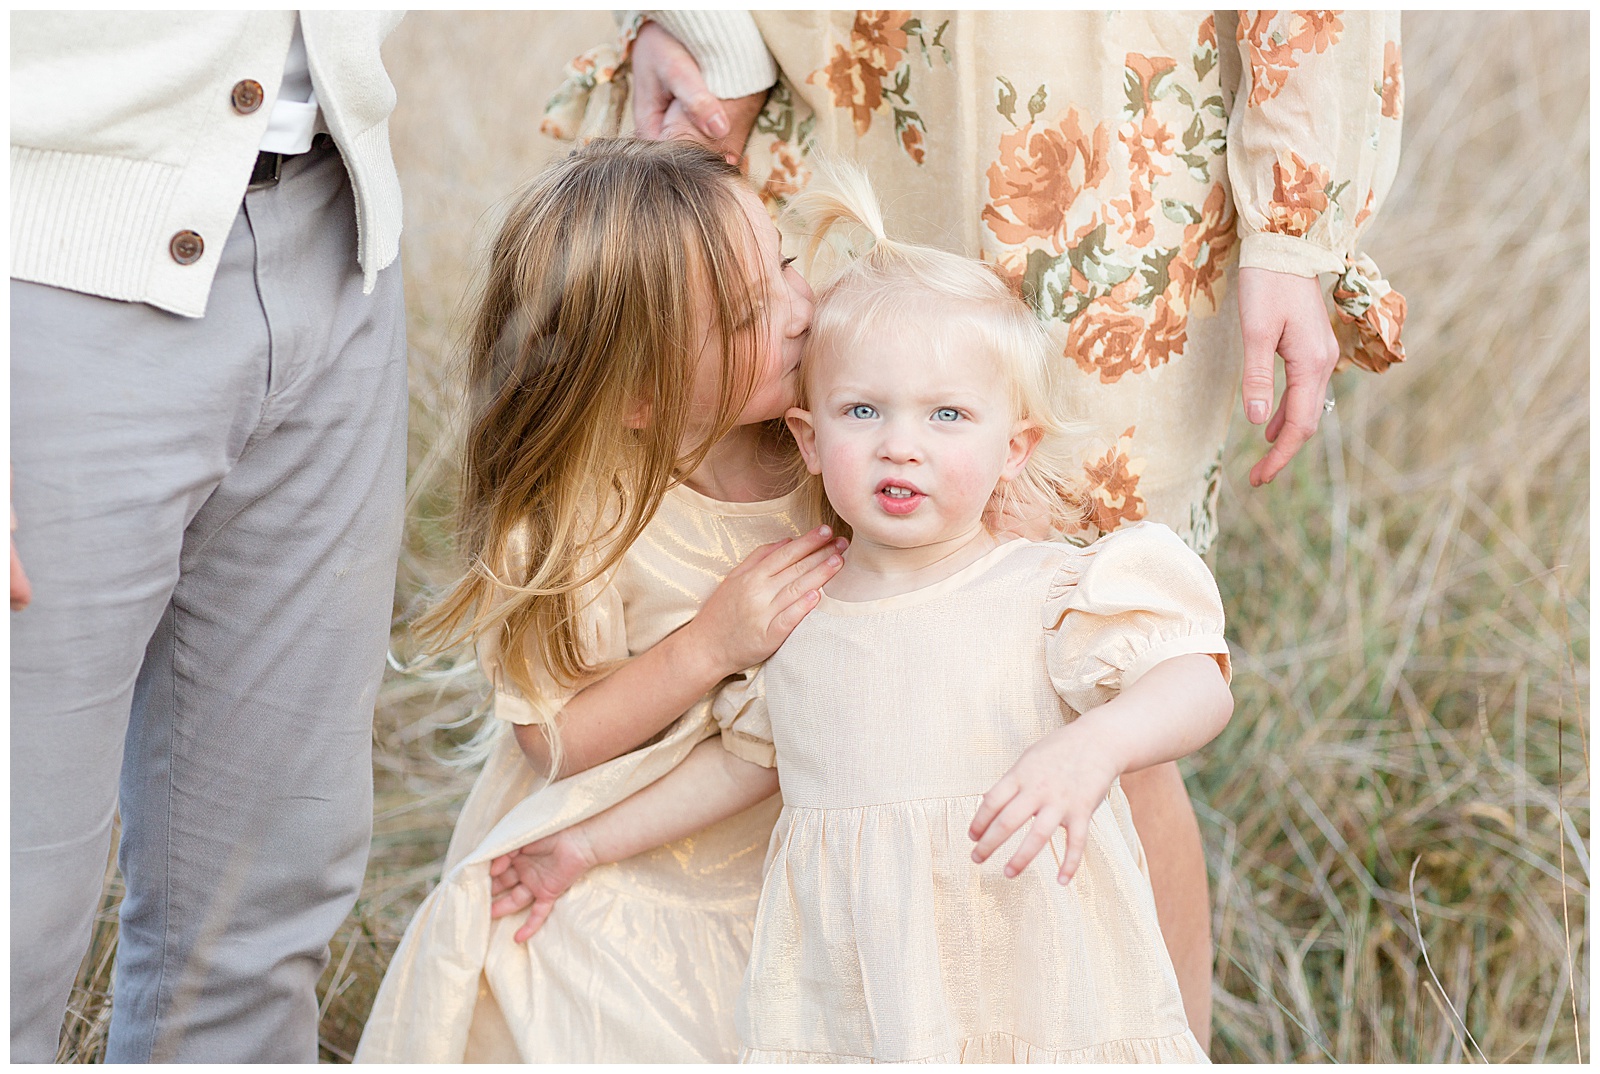 Two sisters stand in front of their parents which are not seen in the frame, wearing matching gold shimmery dresses and big sister gives a kiss on her little sisters head as the little one looks at the camera.